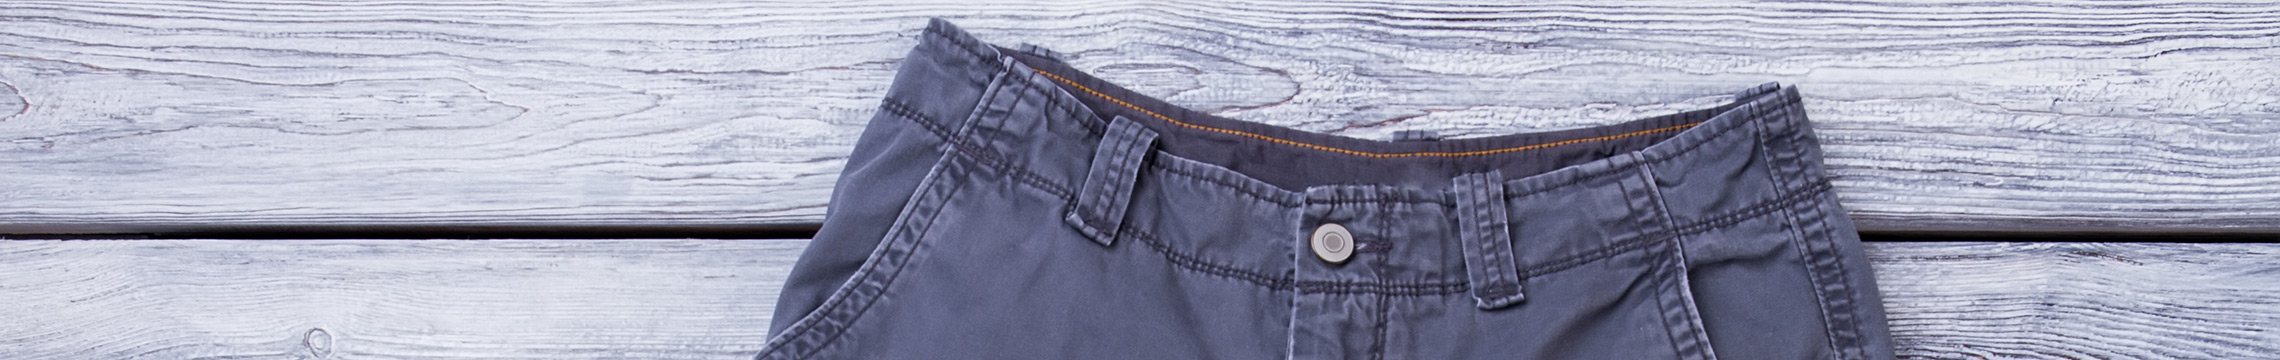 Grey cargo shorts laid gently across a white washed wooden background